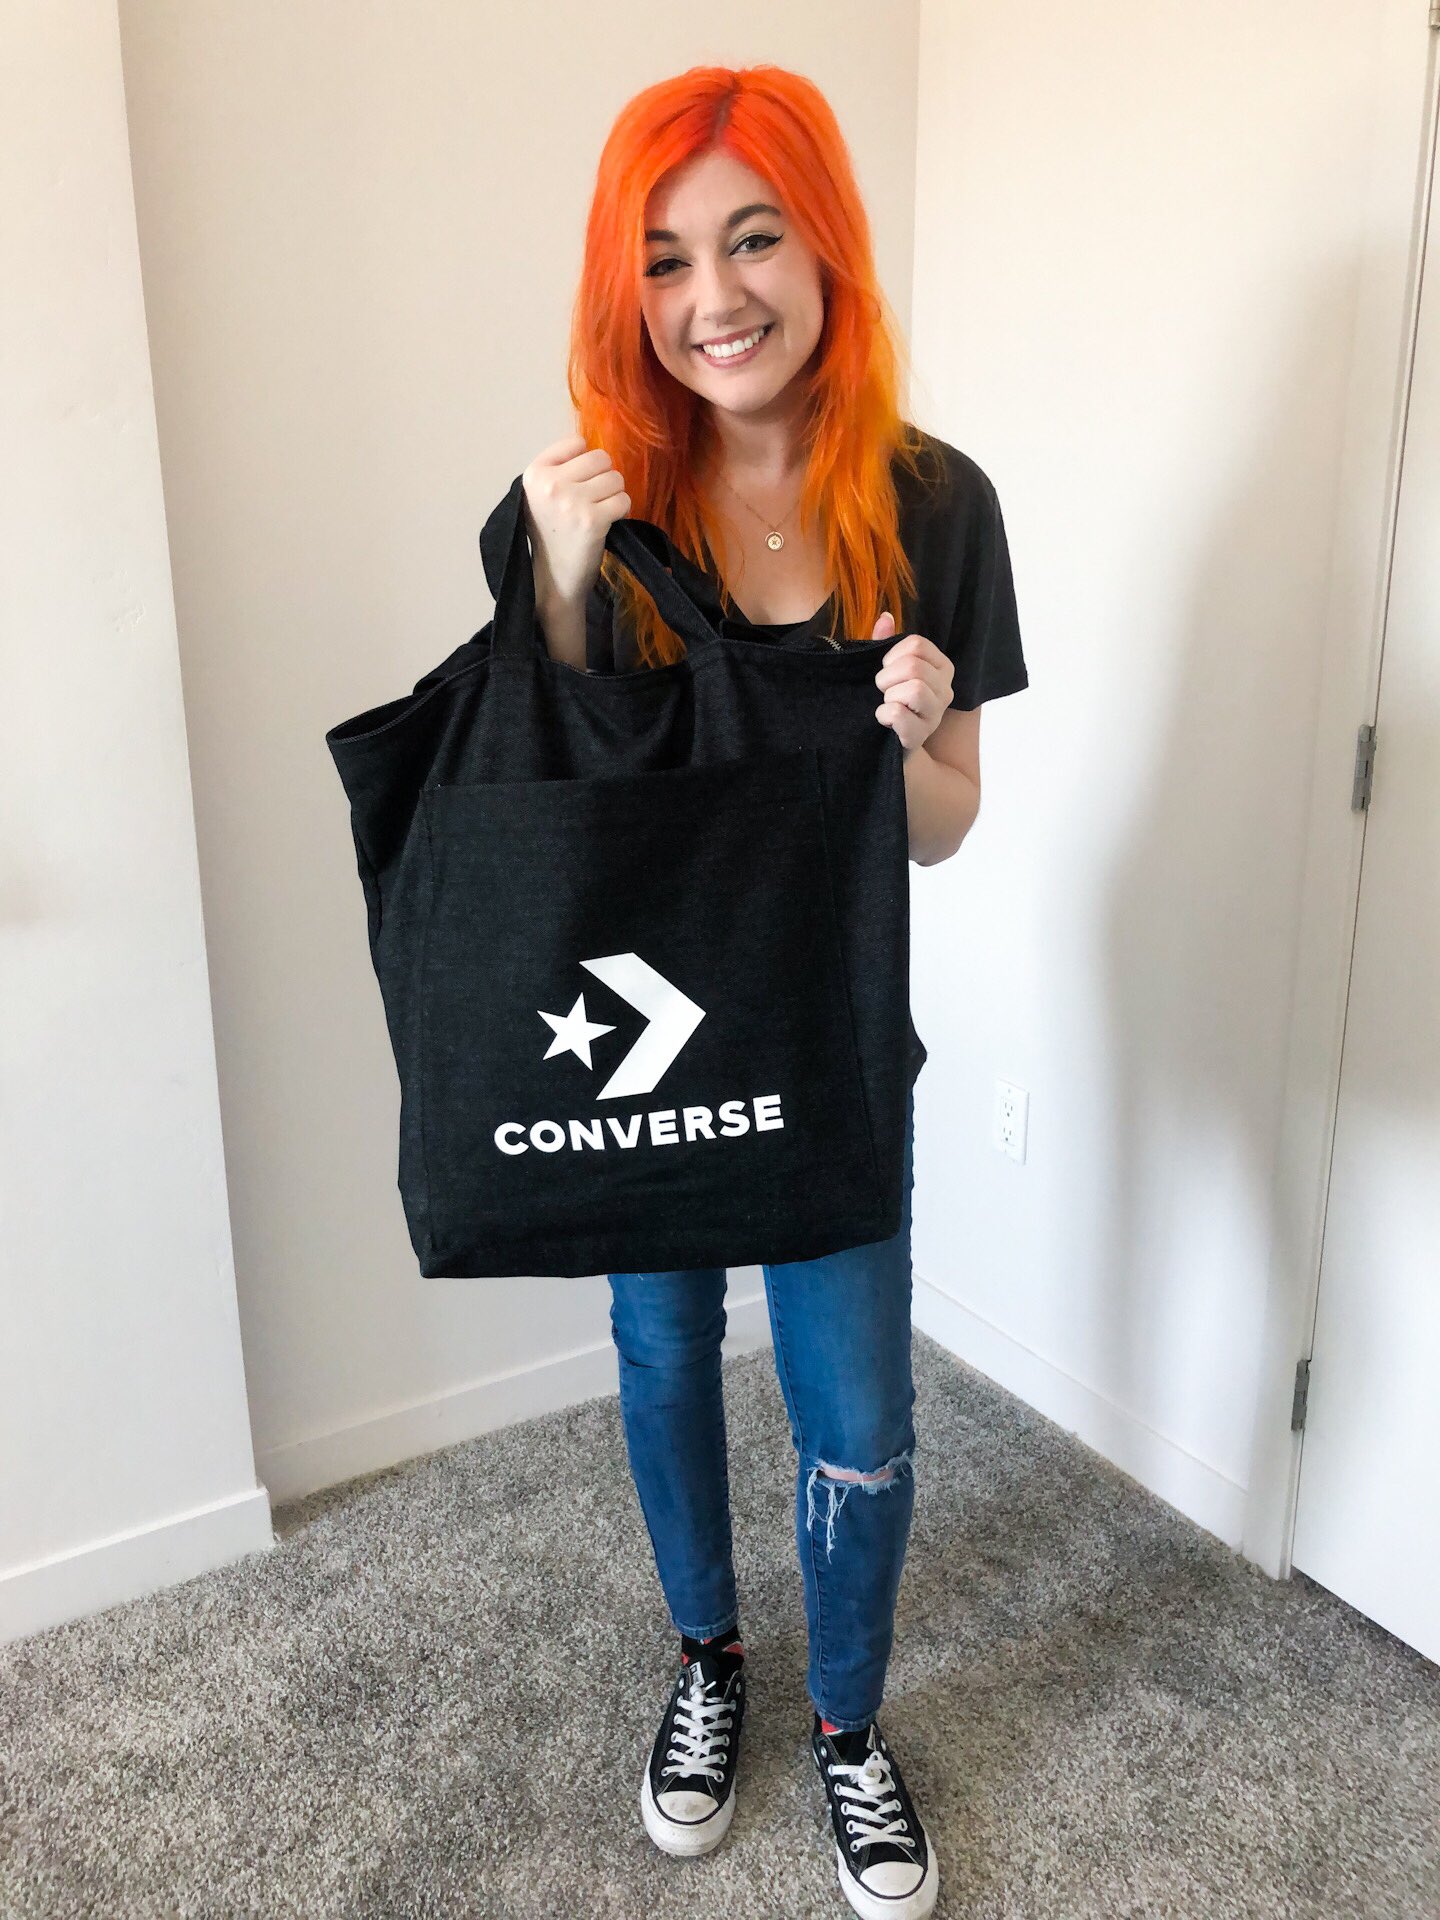 Cahlaflour on Twitter: "I can't believe I'm saying this... @Converse sent me a gift bag to open on stream!!!! Come check out the unboxing! #Sponsored Live: https://t.co/2wSuLXOPnJ https://t.co/Plog896WNl" X